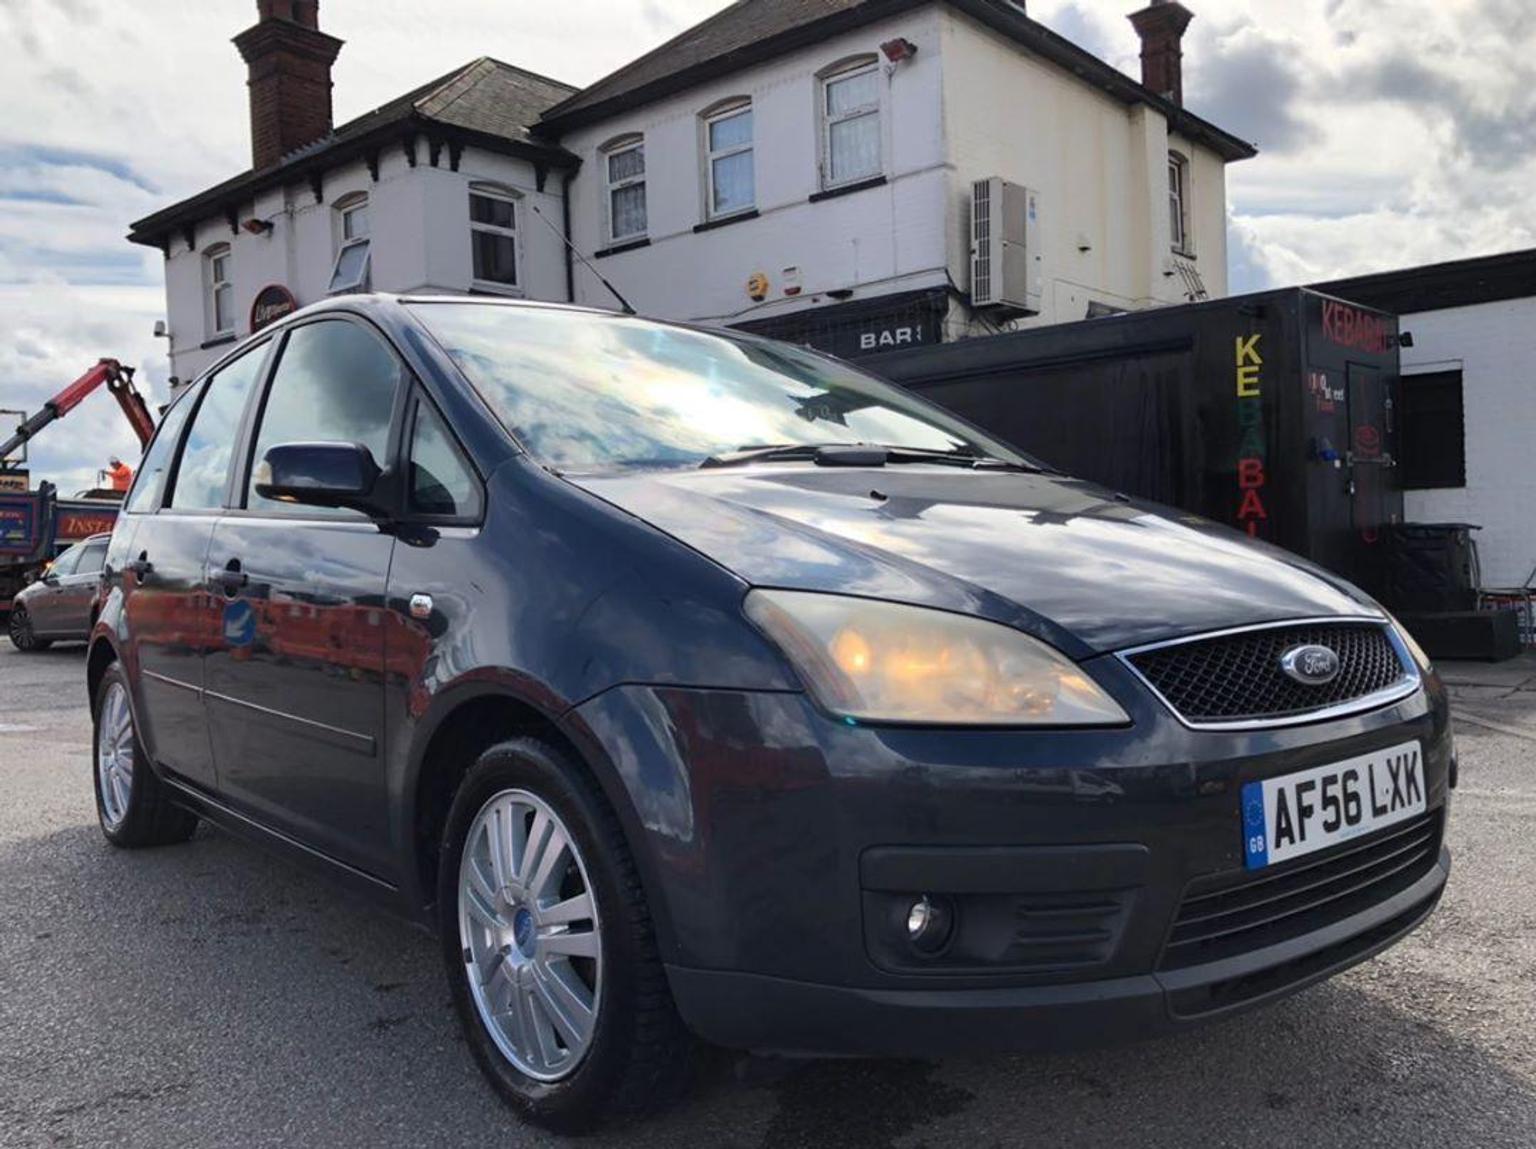 Ford Focus C Max In Da12 Gravesend For 850 00 For Sale Shpock